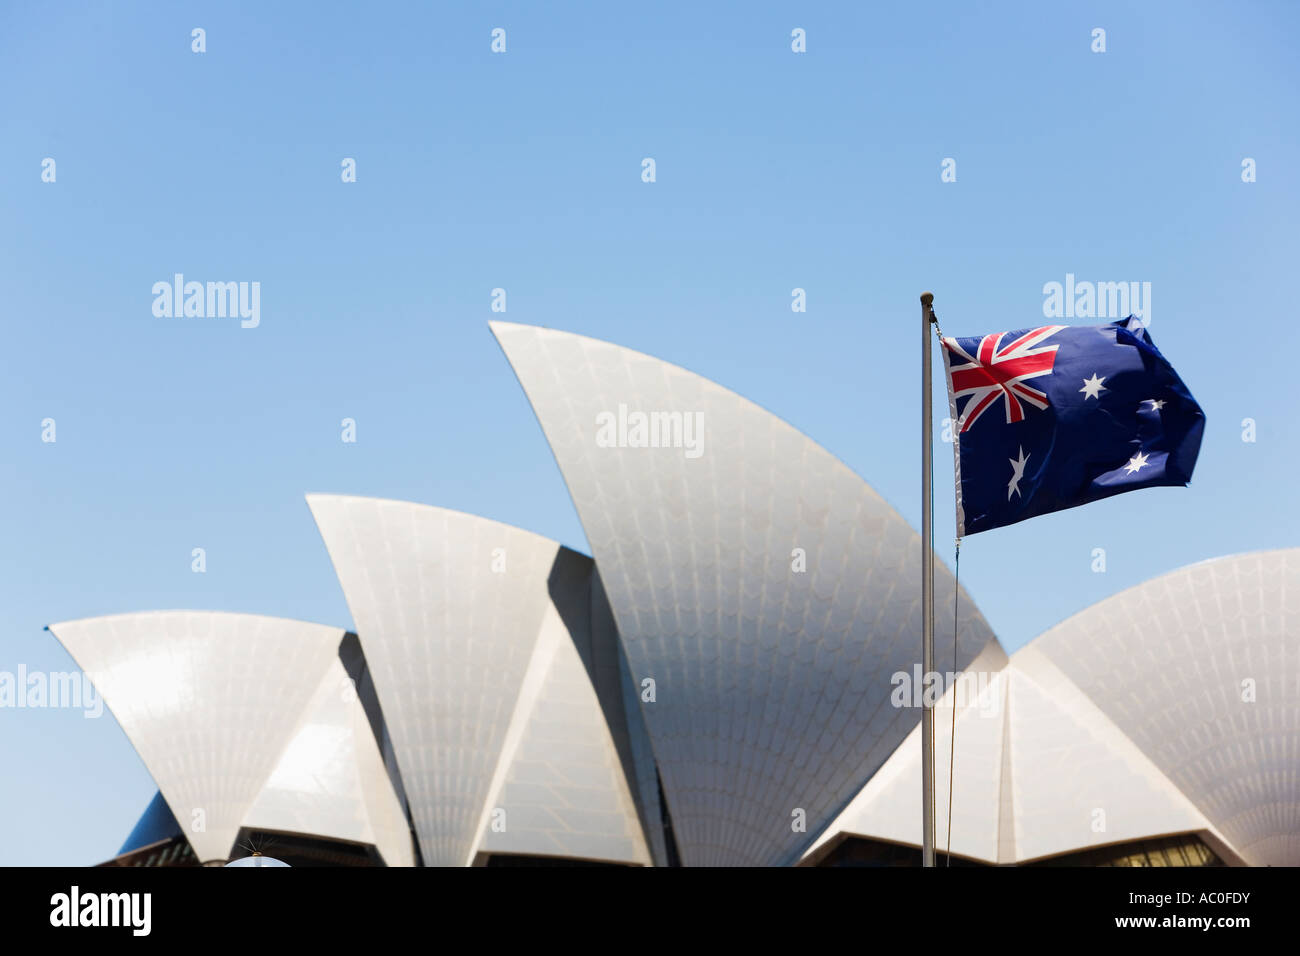 An Australian flag flutters in front of the arched rooftops of the Sydney Opera House Stock Photo